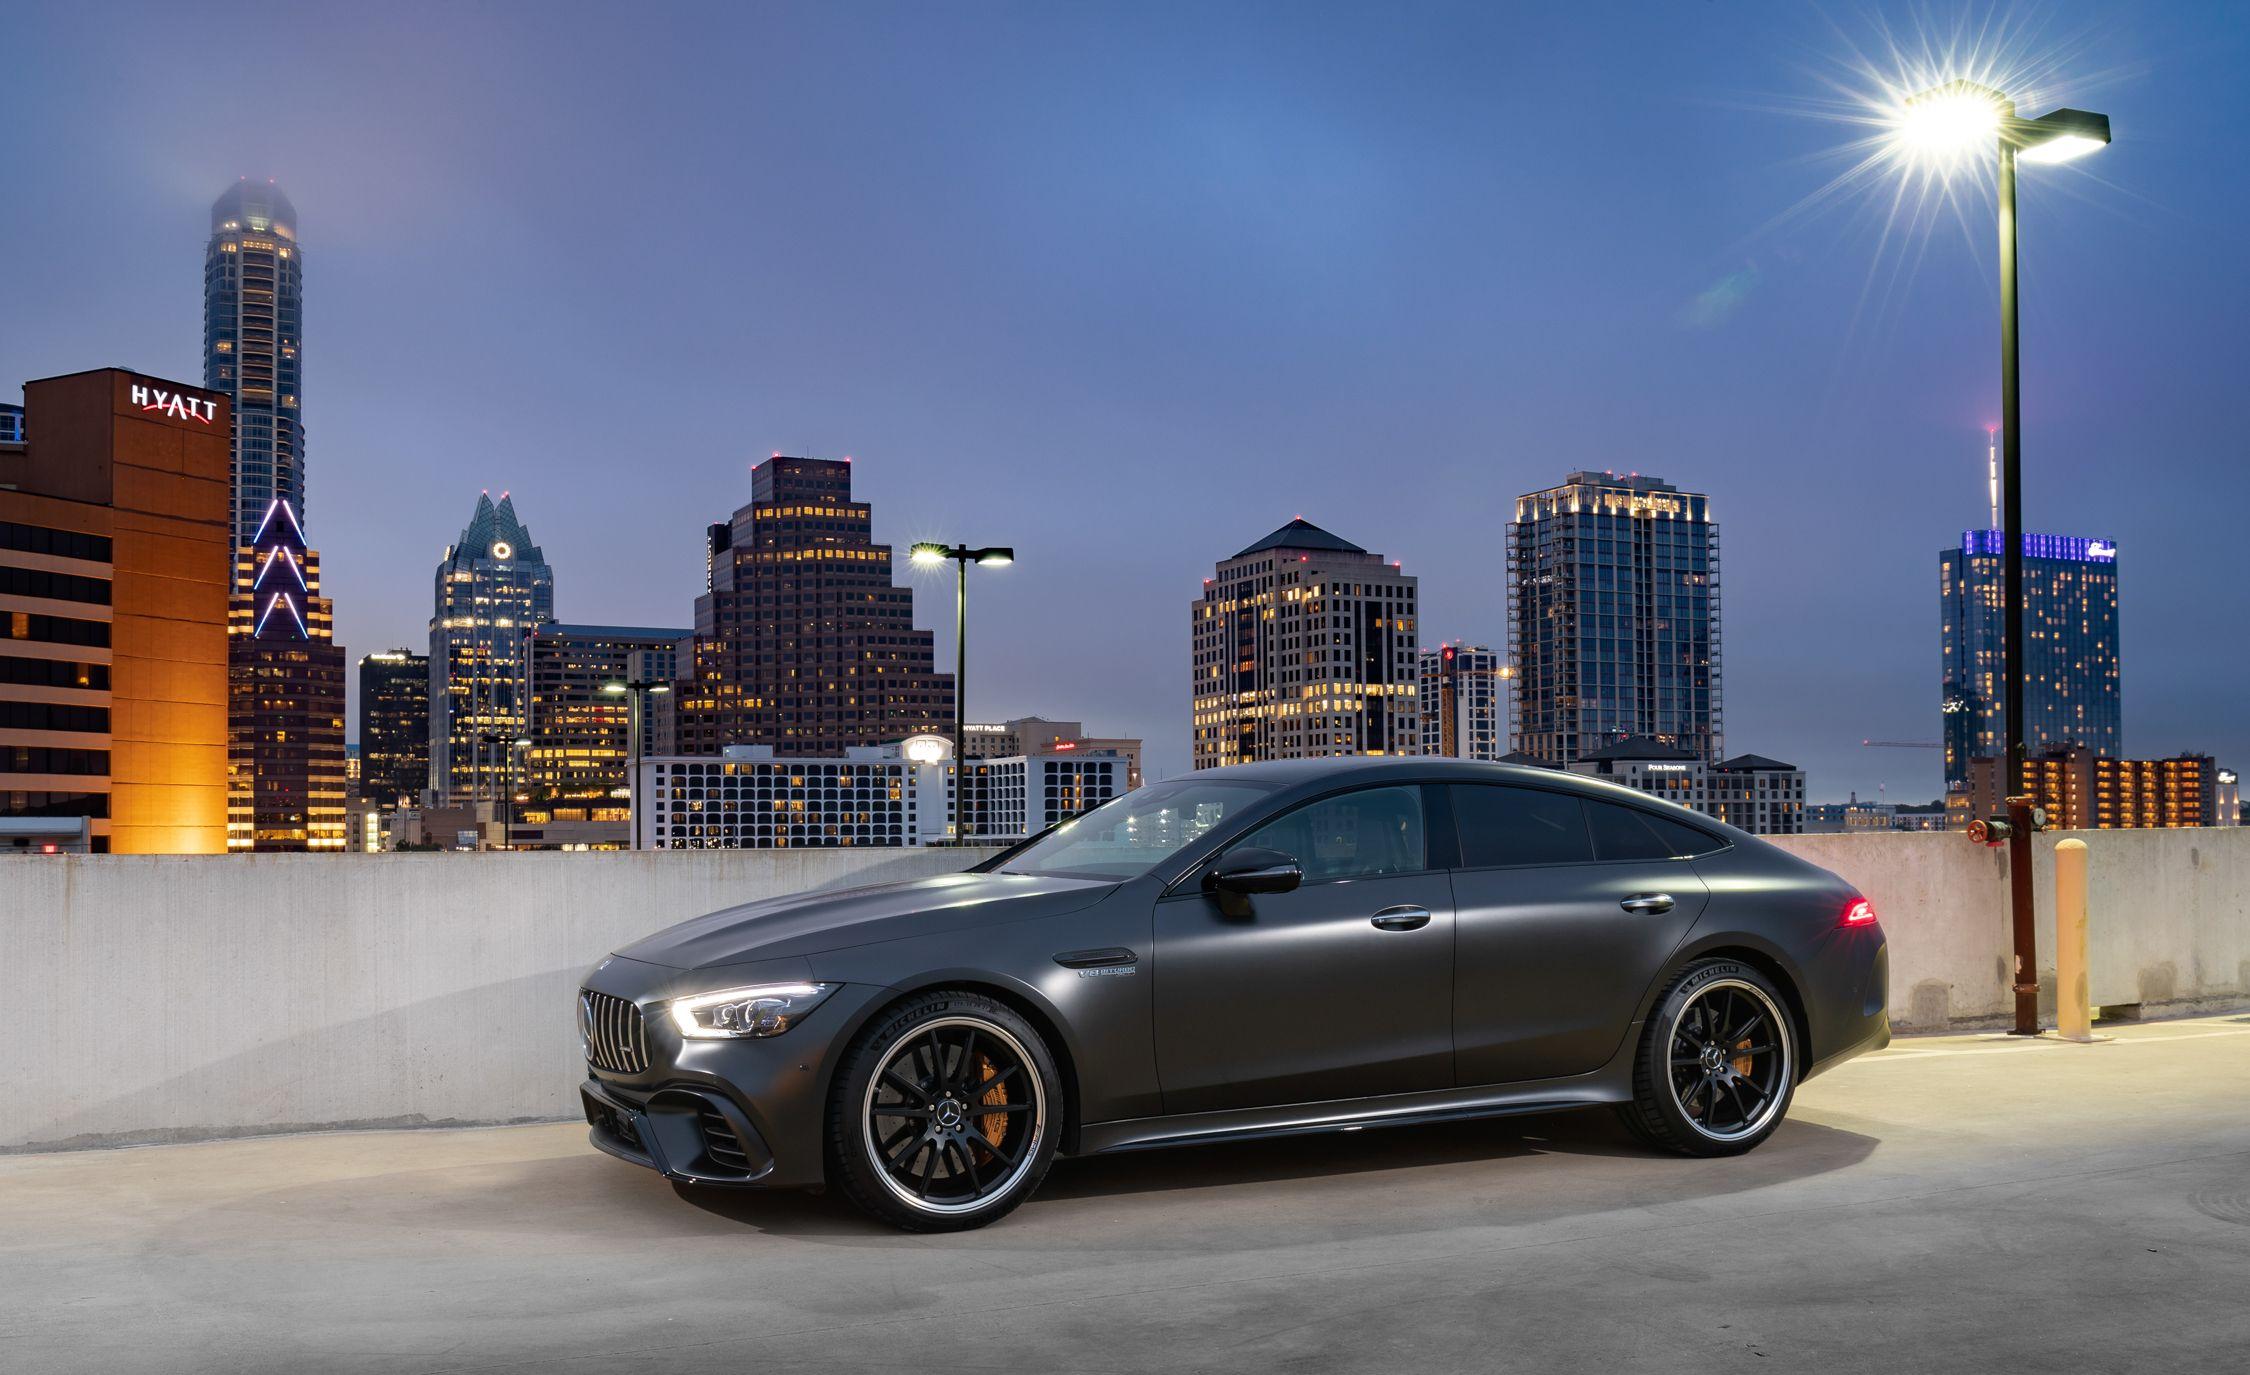 The 2019 Mercedes AMG GT63 S